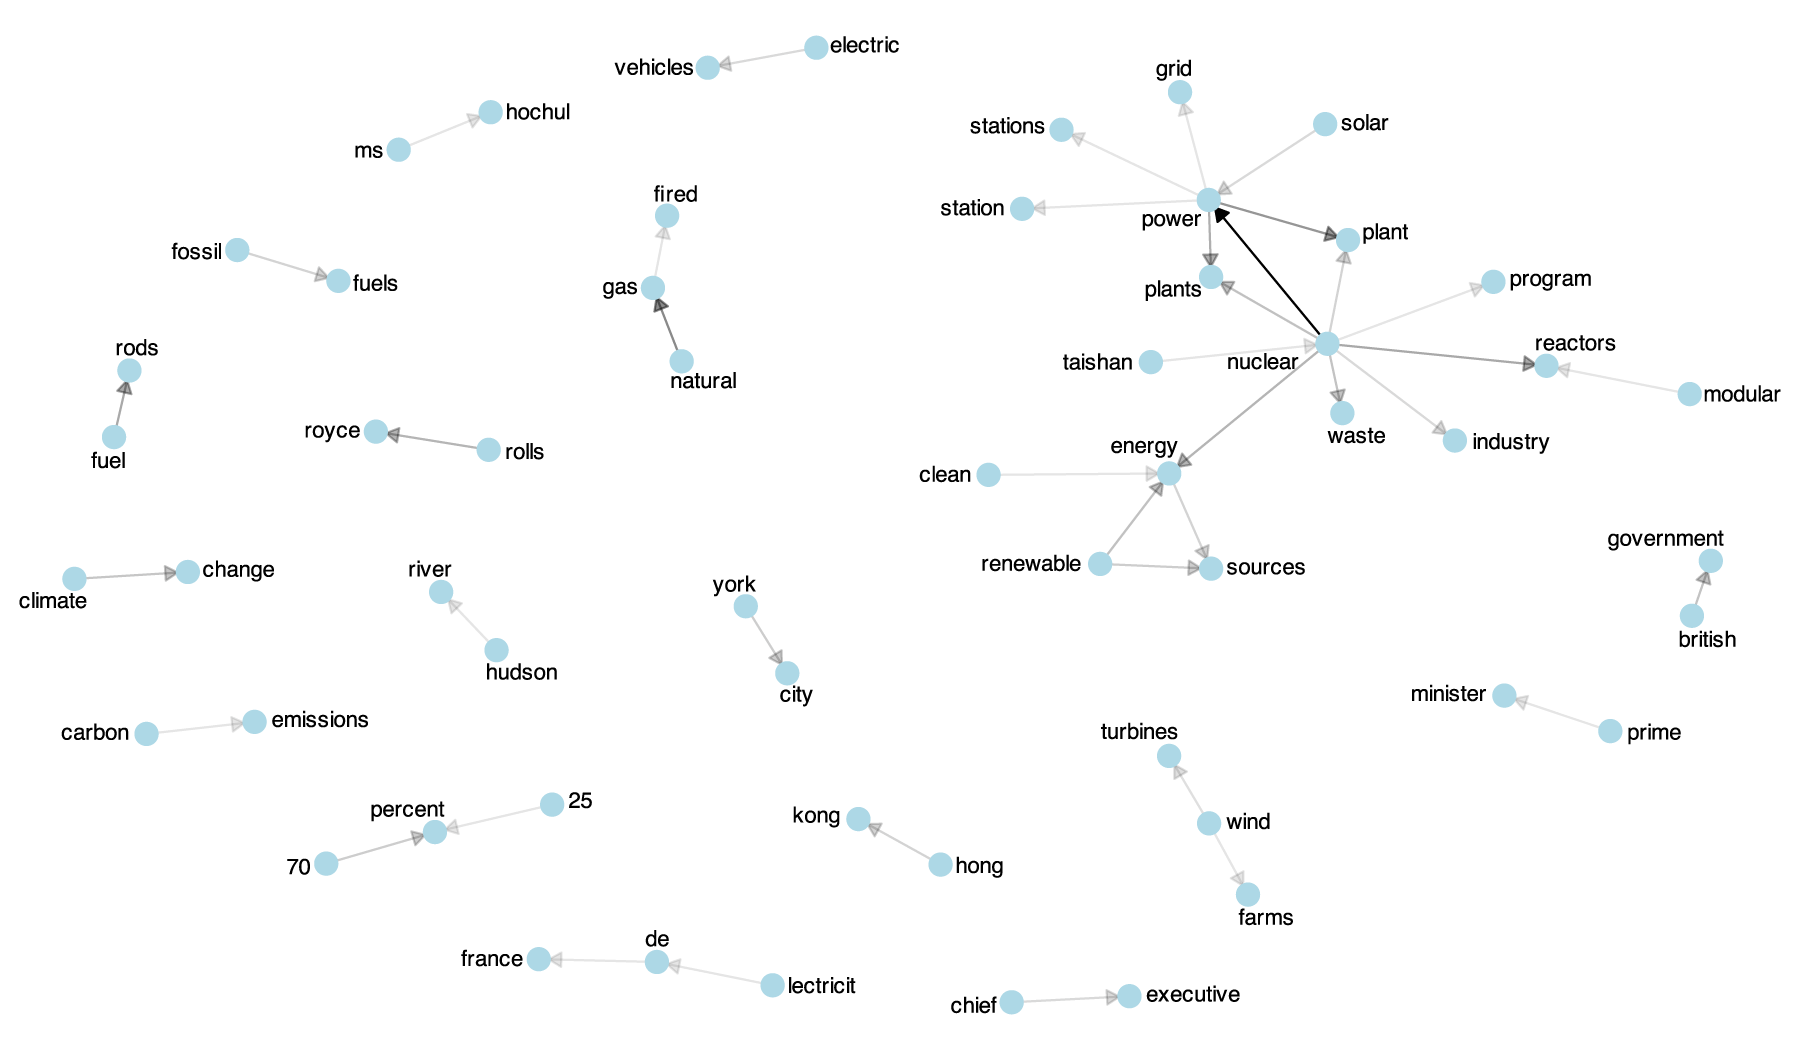 Network map of topics discussed in the news media in 2021